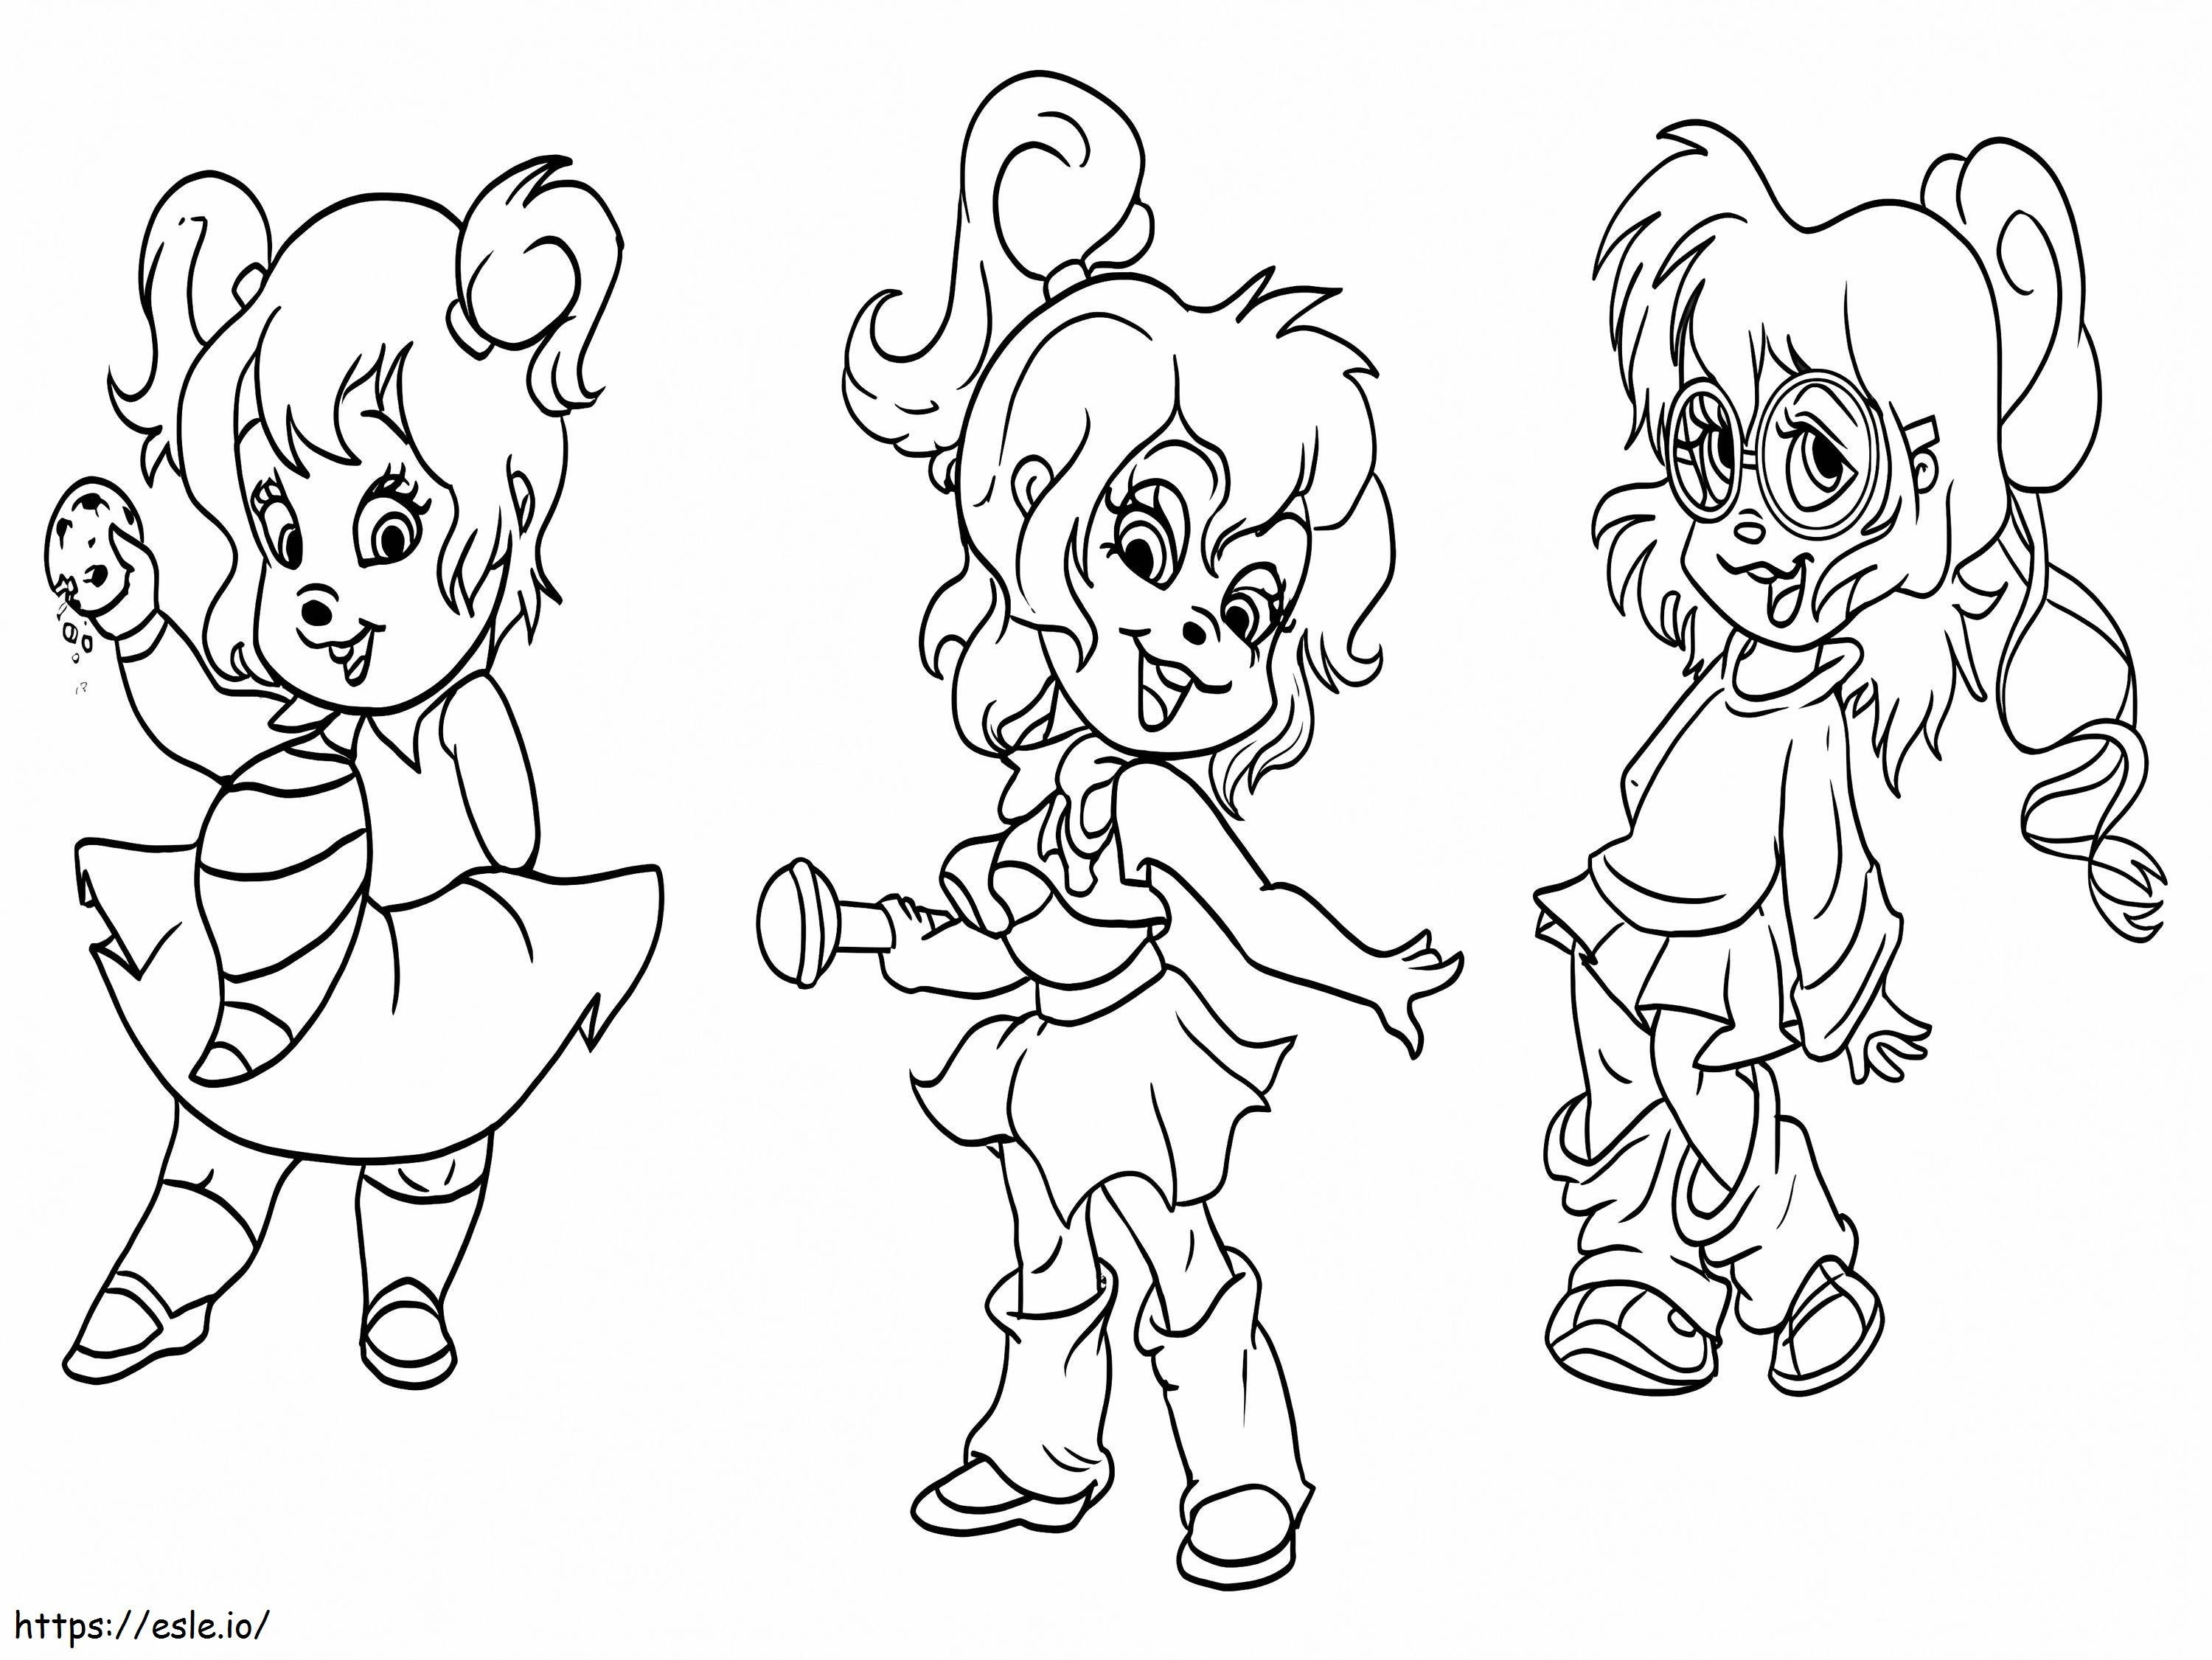 Pretty Chipettes coloring page